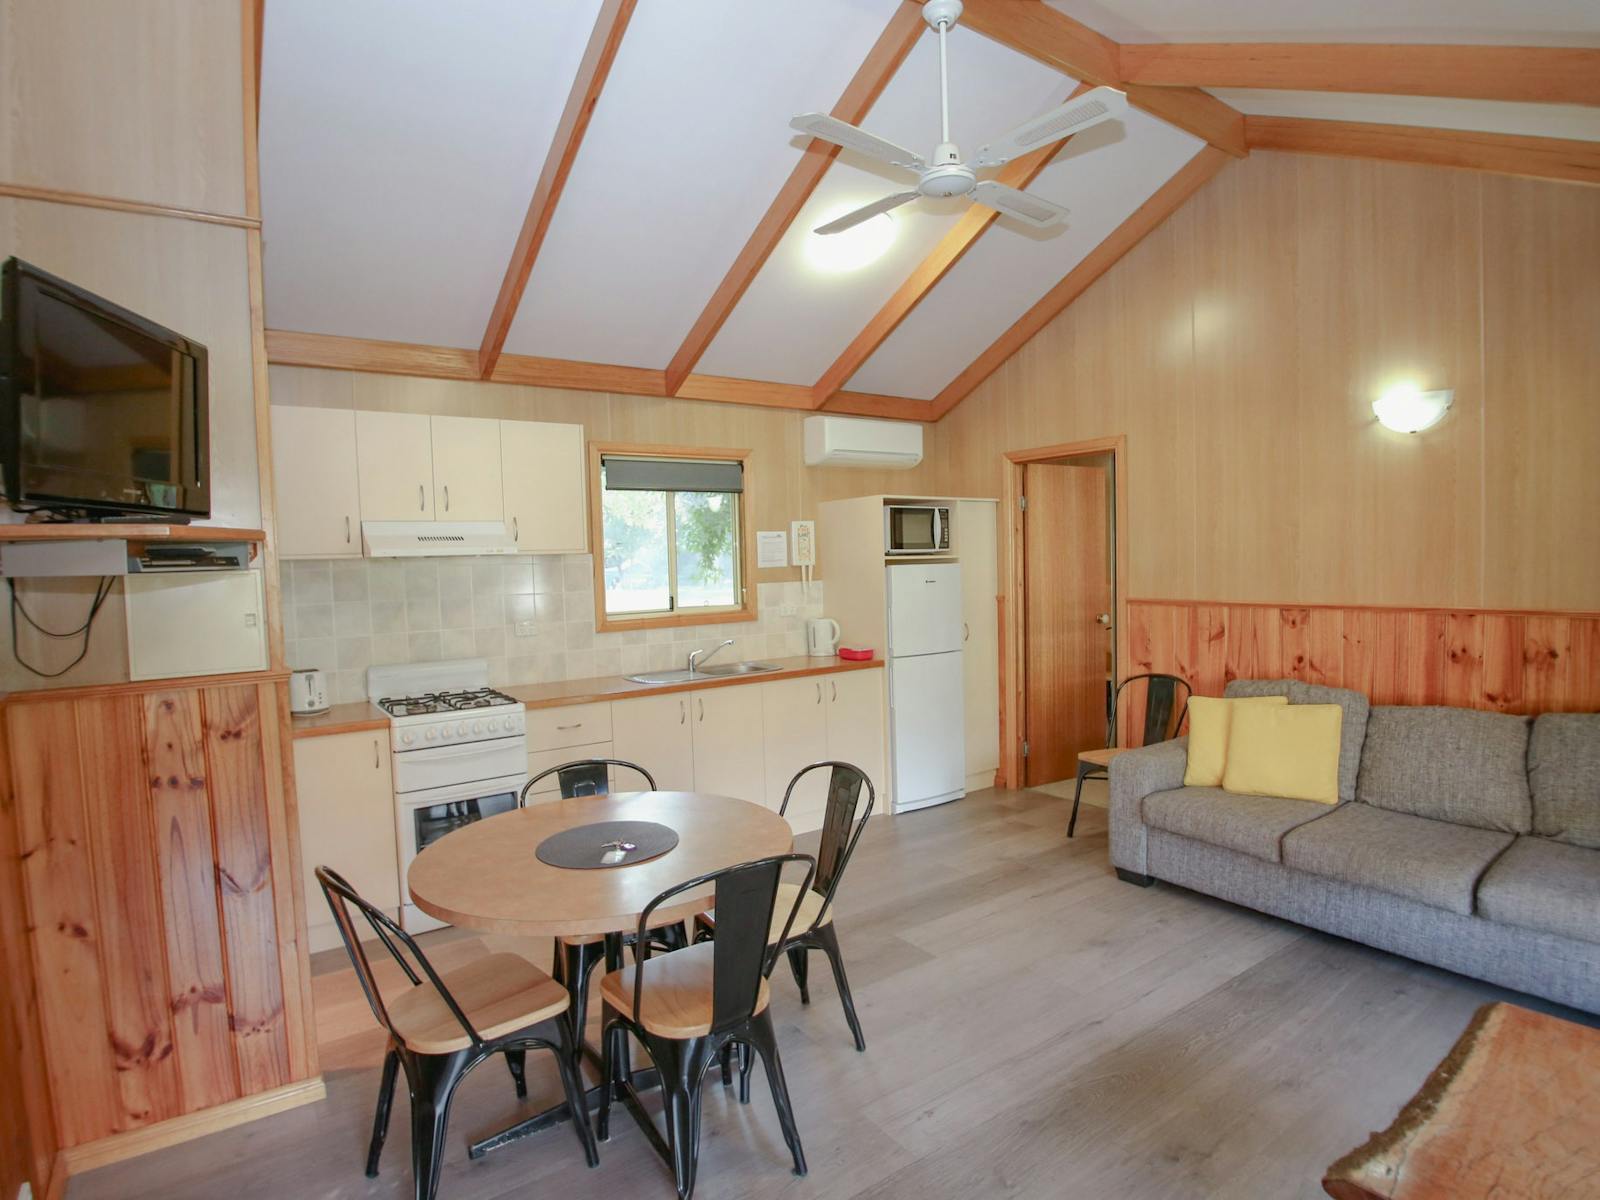 image of living room inside cabin with dining table, couch and kitchen